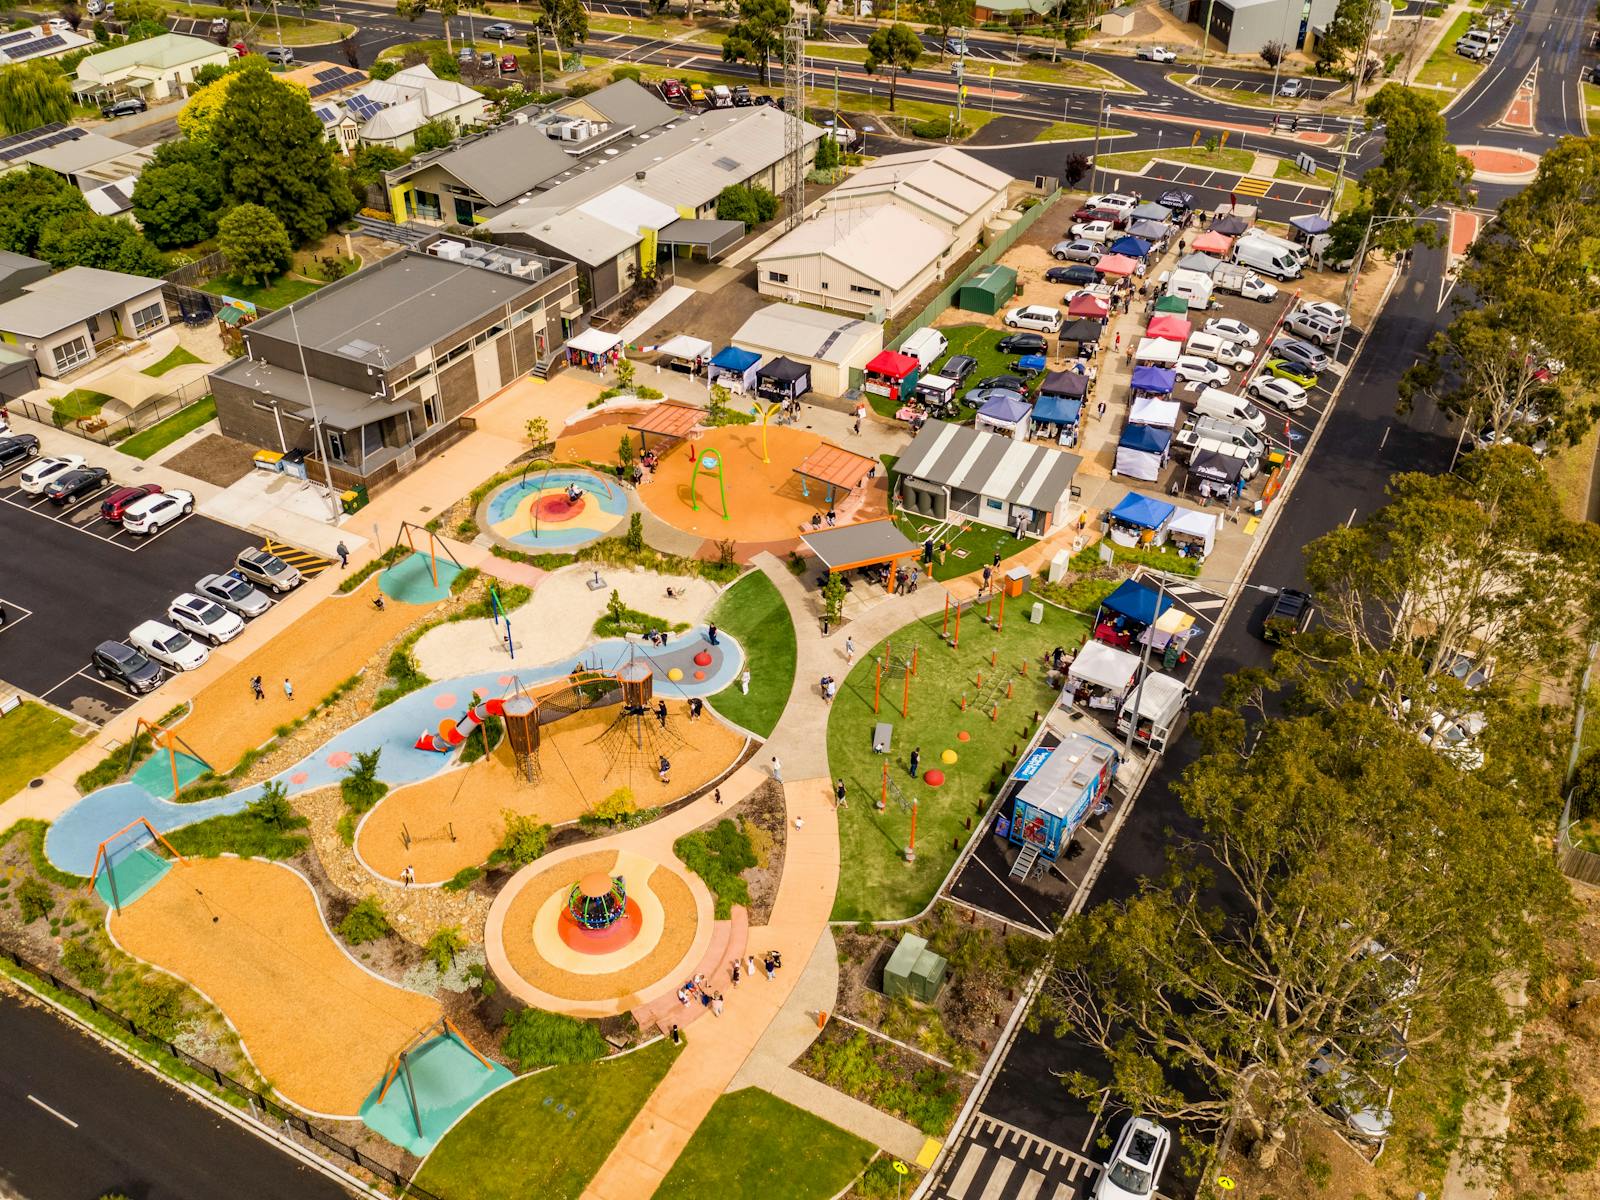 Aerial View of the Farmers' Market and the Heart Playground